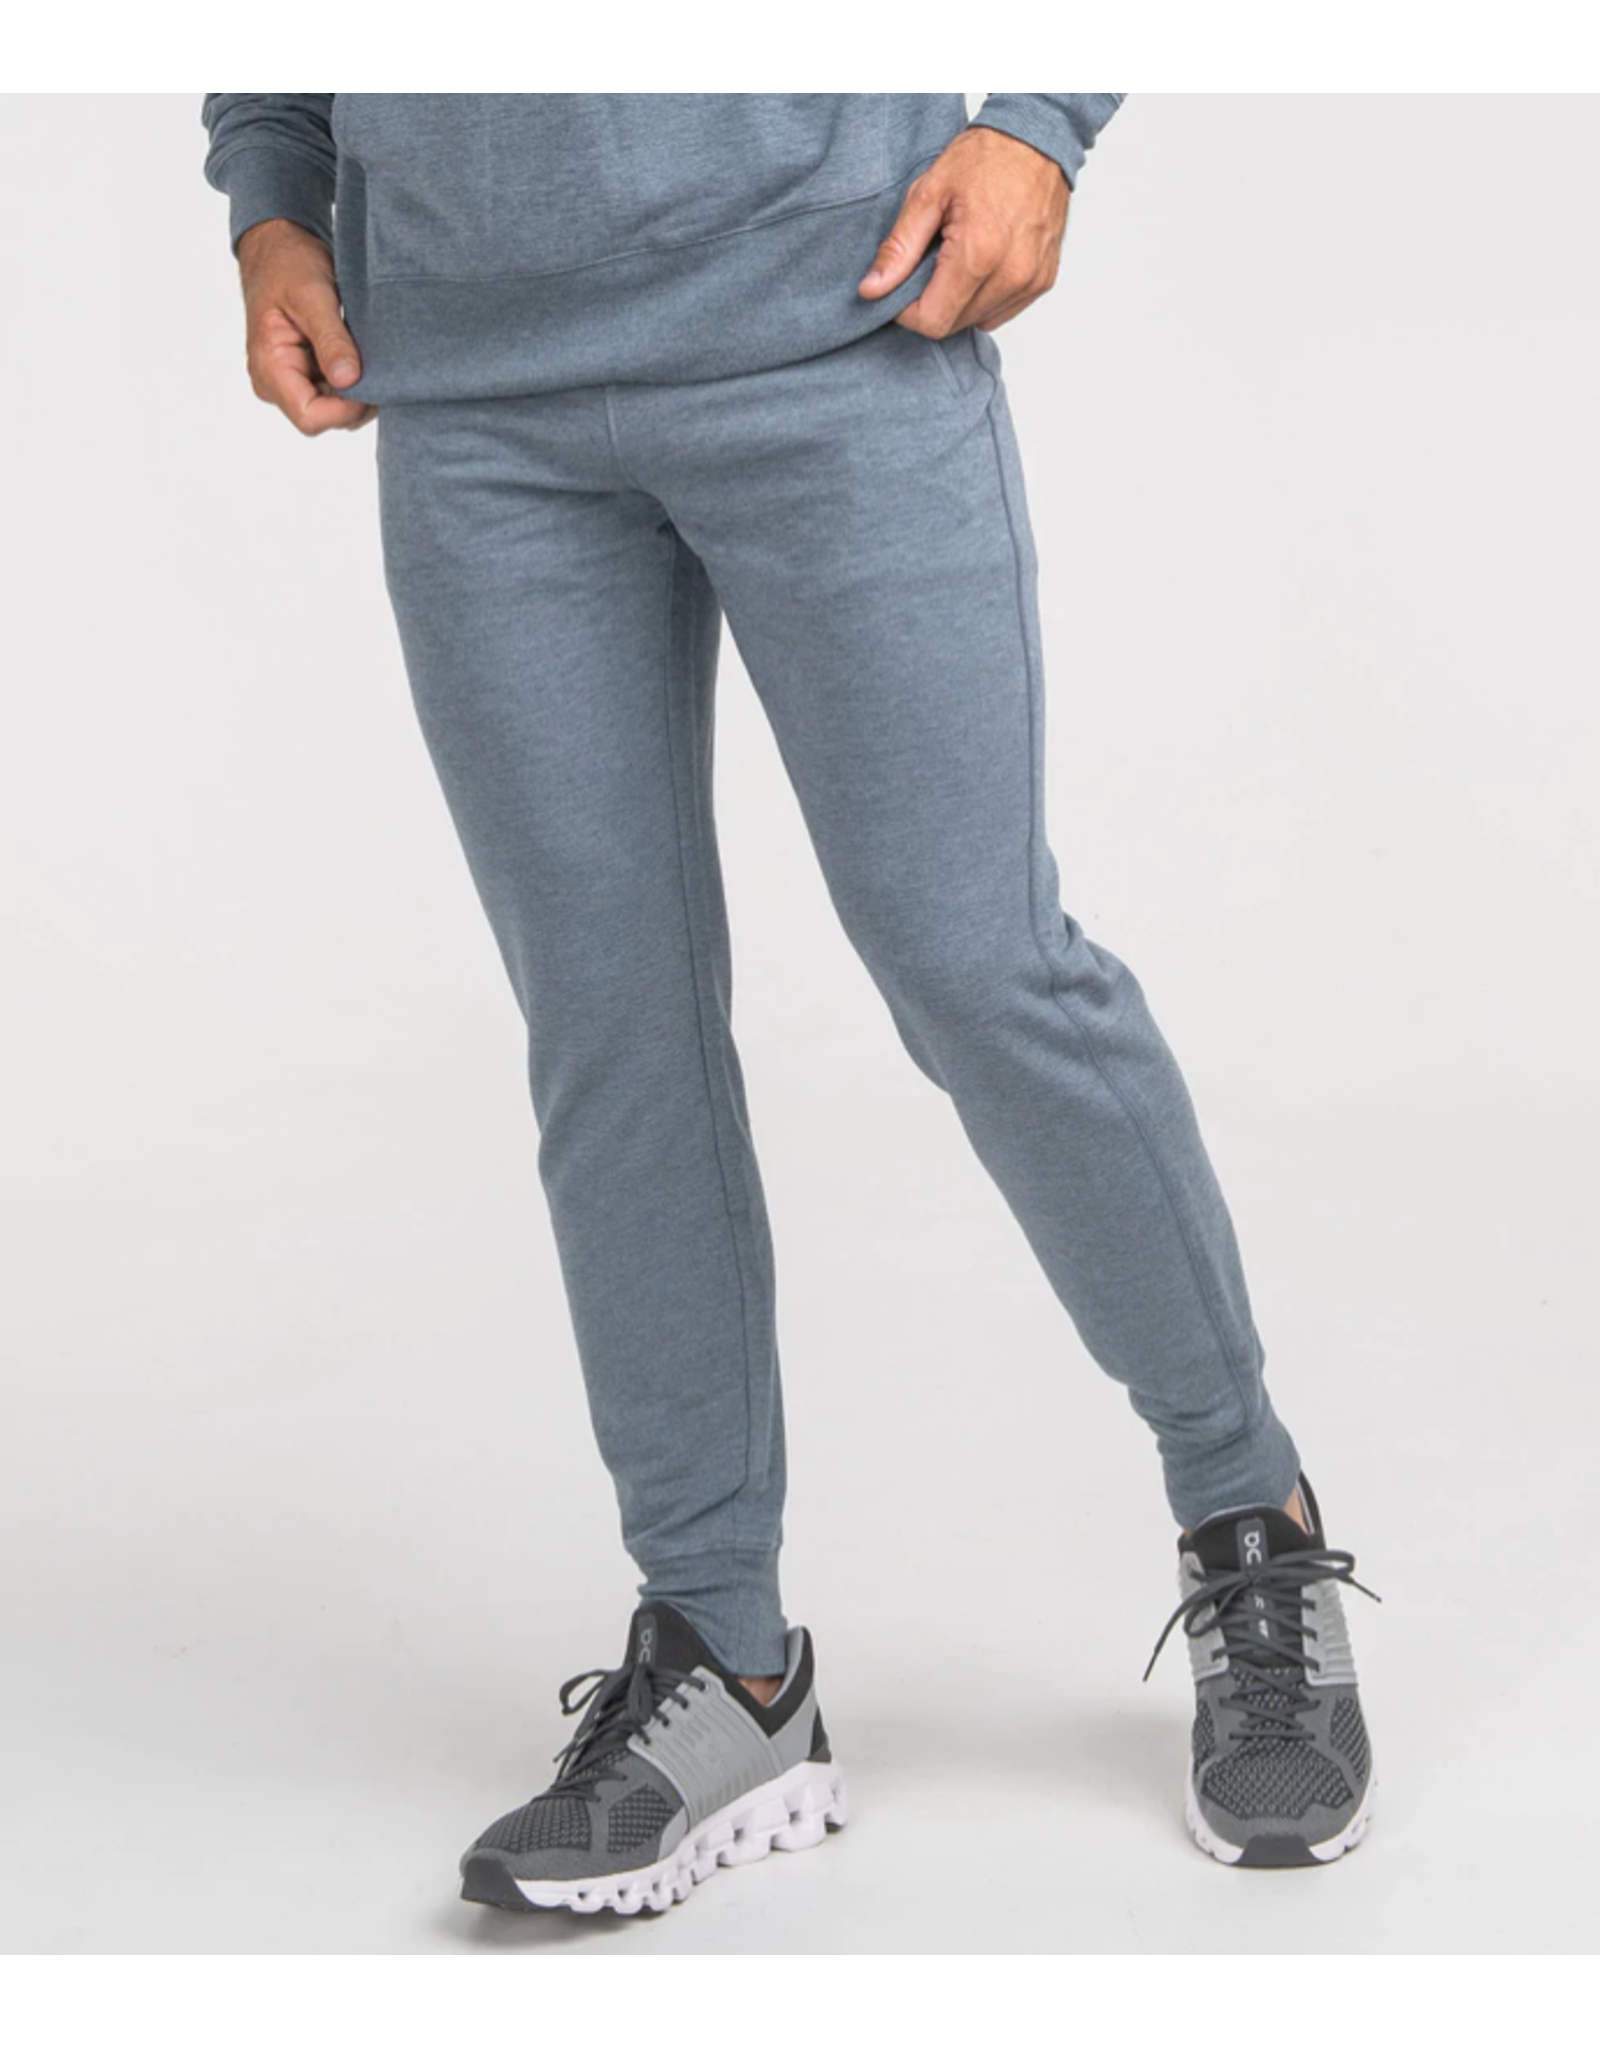 Southern Shirt Company Midtown Joggers Esquire Navy